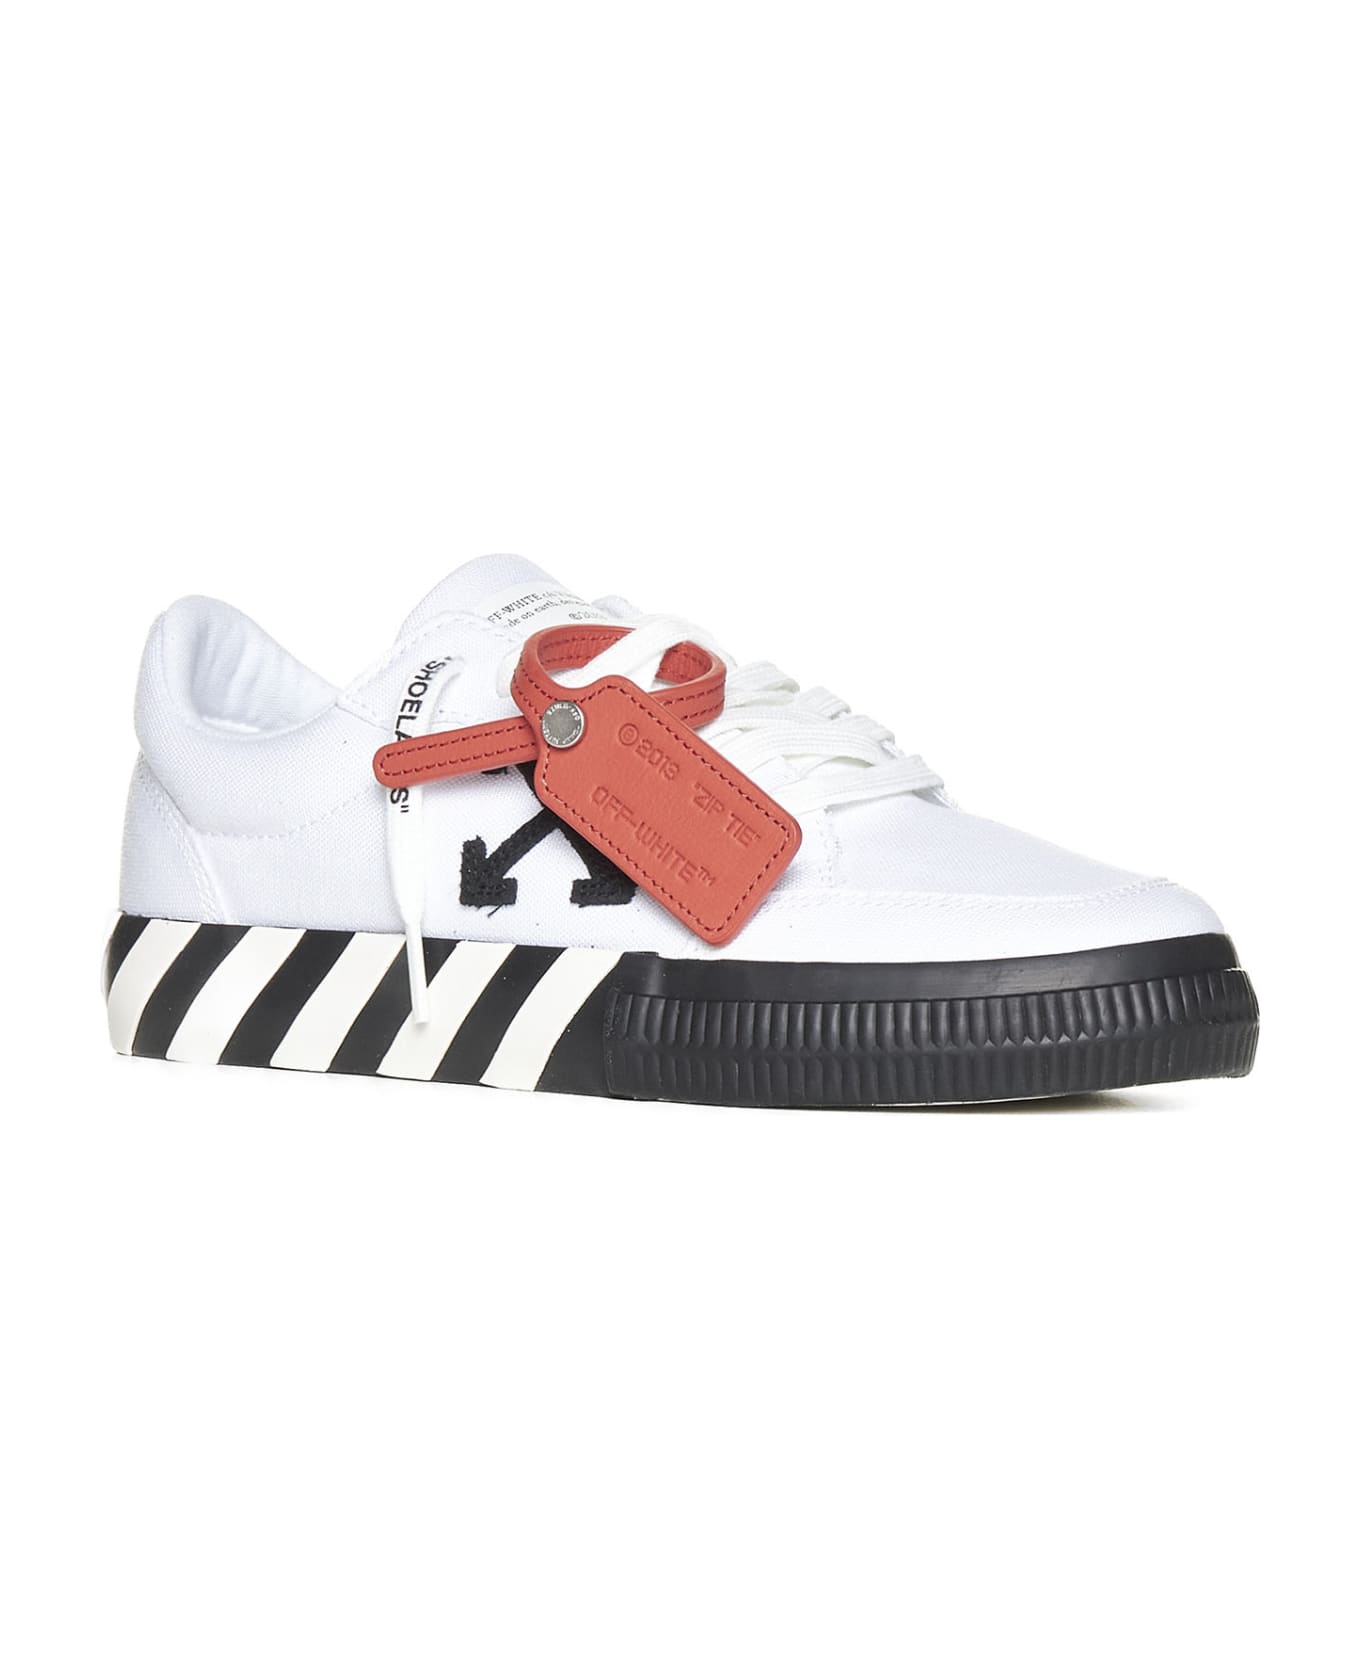 Off-White Low Vulcanized Canvas Sneakers - White Black スニーカー